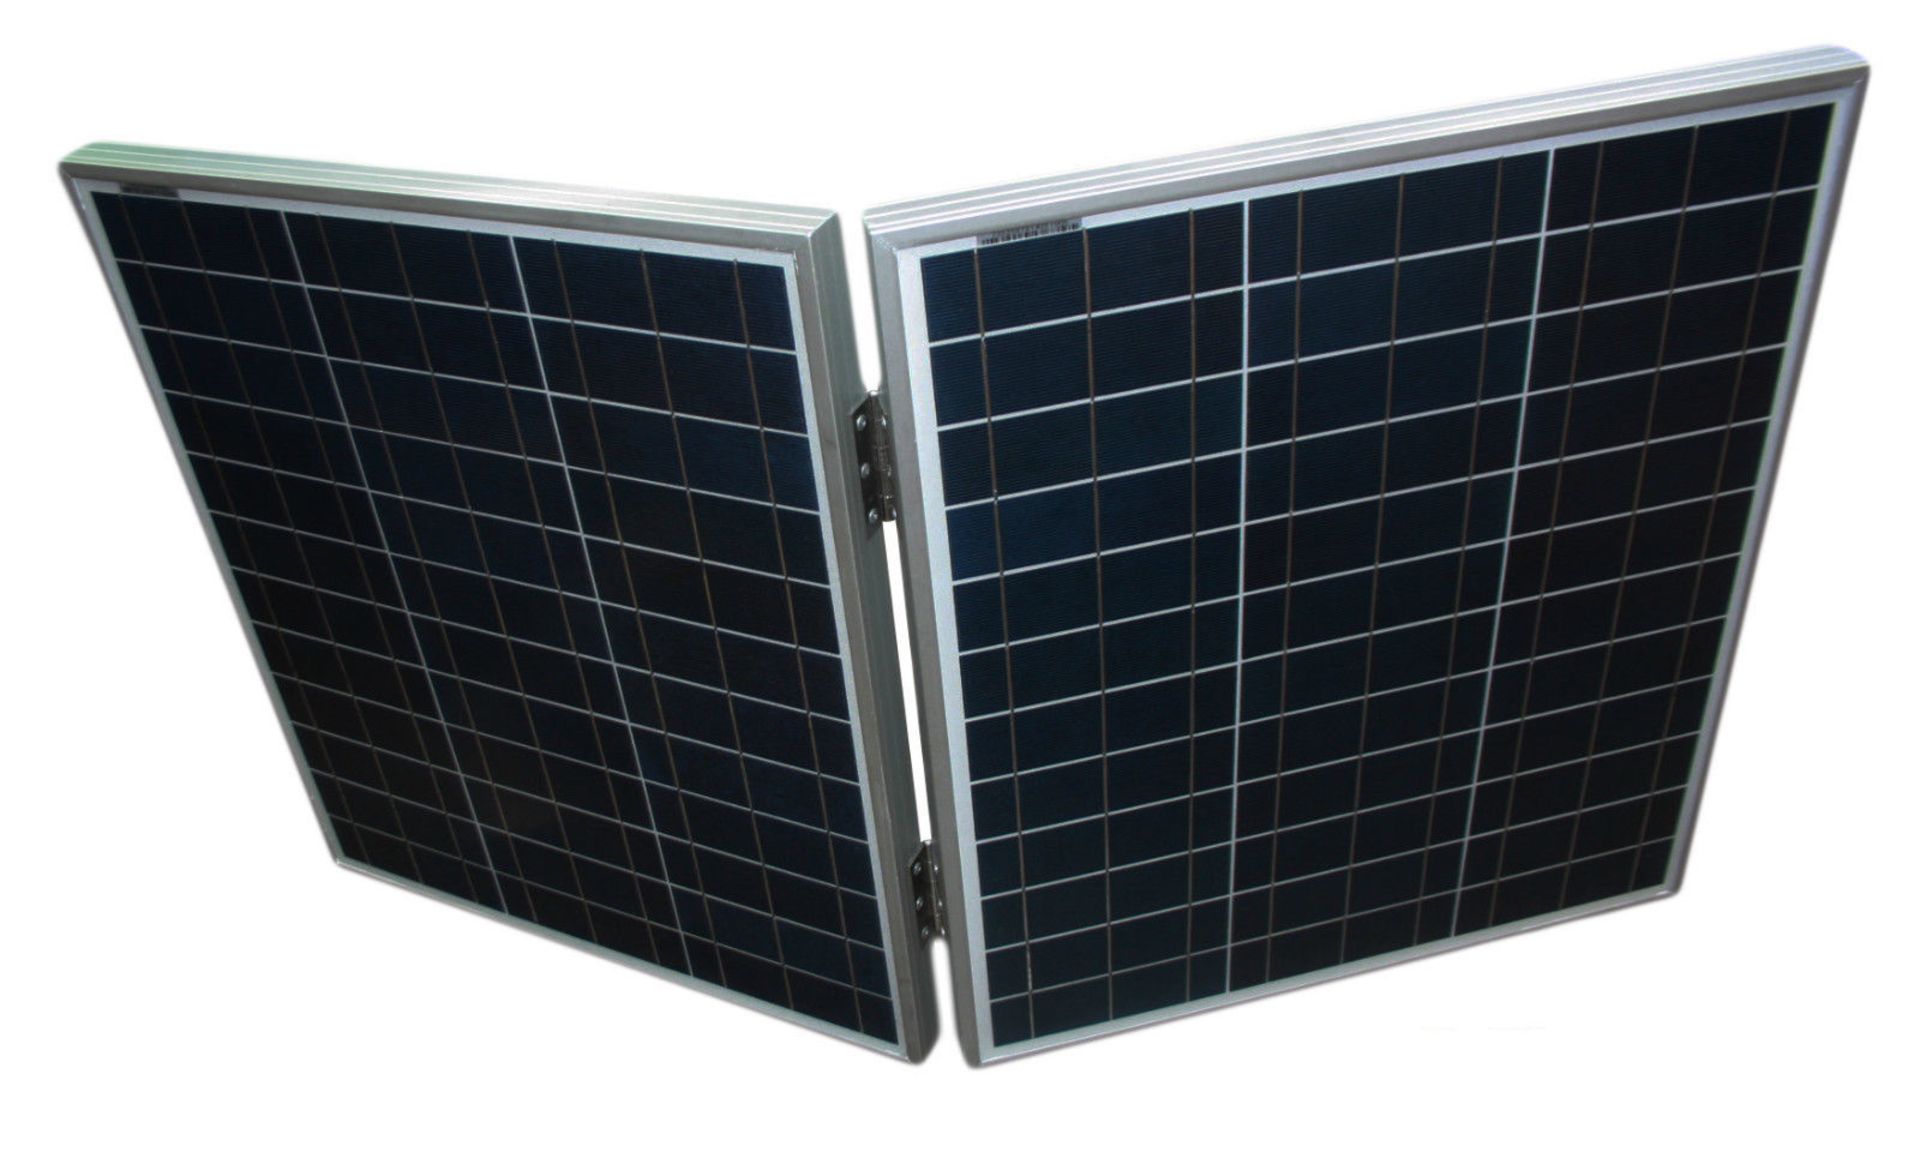 120 Watt FOLDING SOLAR PANEL - QTY: 1 Waterproof, this panel is supplied with regulator and solar